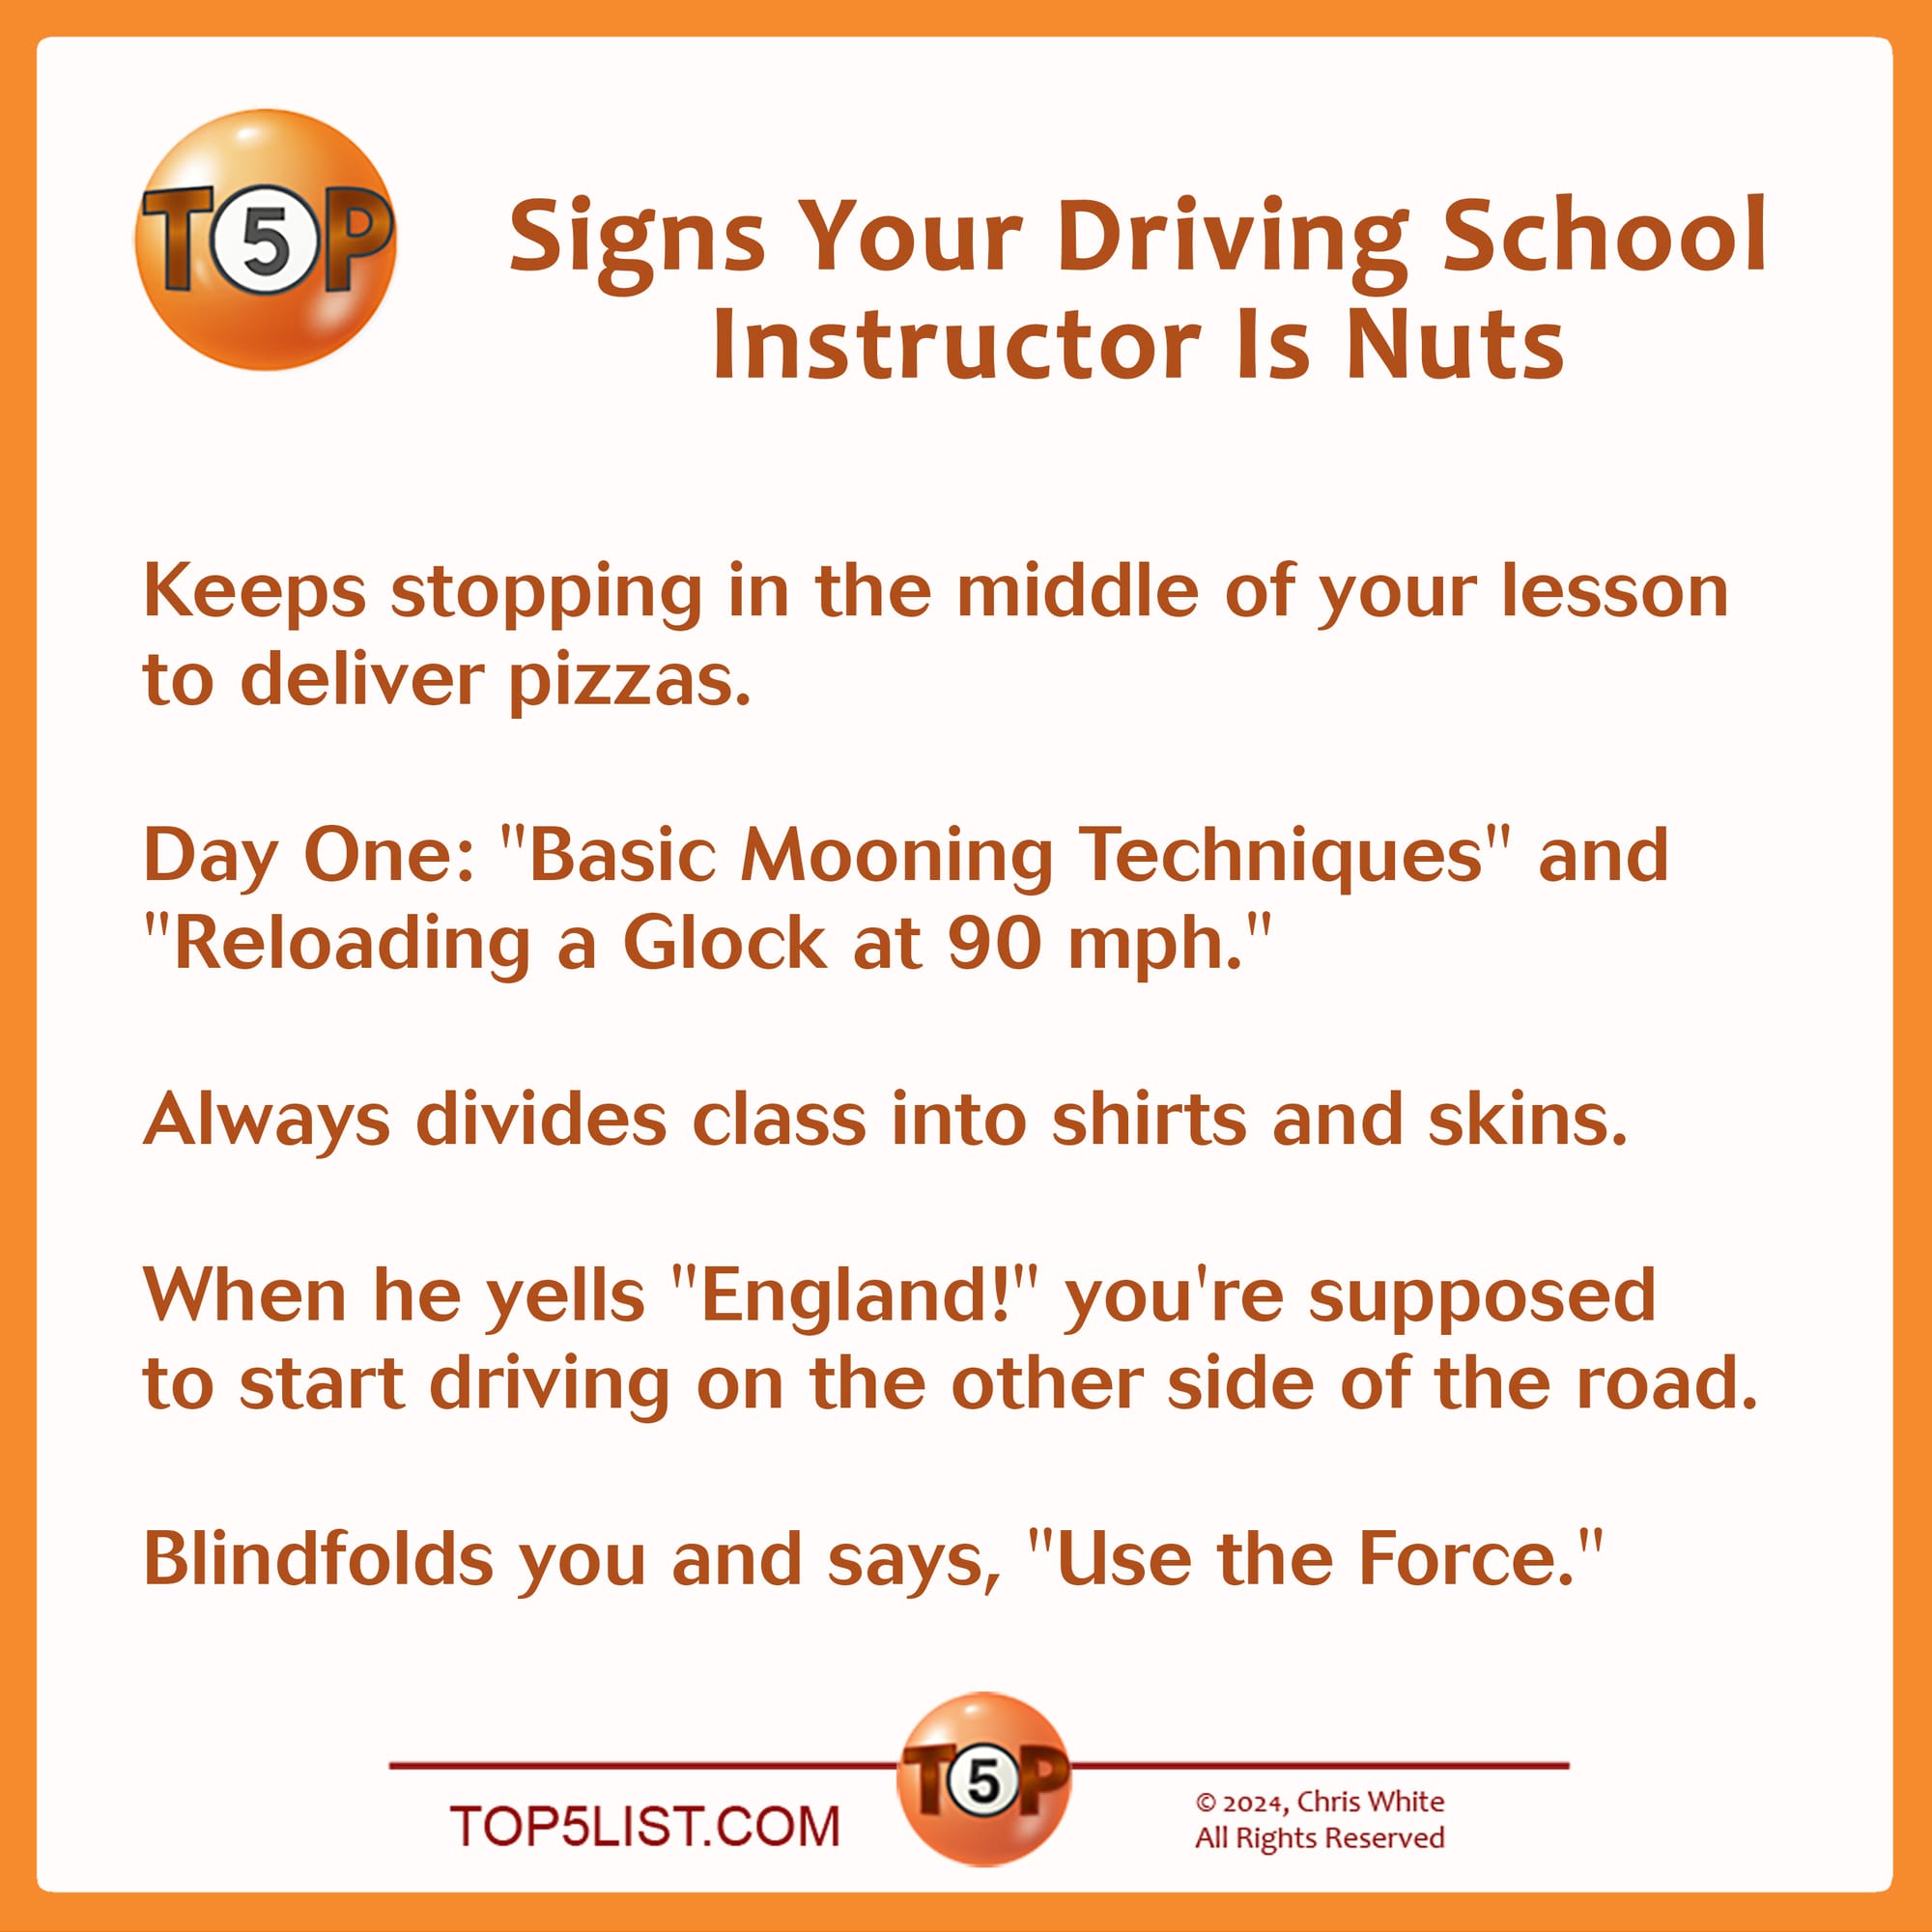 Signs Your Driving School Instructor Is Nuts    |  Keeps stopping in the middle of your lesson to deliver pizzas.    Day One: "Basic Mooning Techniques" and "Reloading a 9mm at 90 mph."      Always divides class into "shirts" and "skins."      When he yells "England," you're supposed to start driving on the other side of the road.      Insists you turn off the headlights and "use the Force."         Selected from 106 submissions from 39 contributors. Credits: 5 - Troy Roberson, Birmingham, AL 4 - Jennifer Ritzinger, Seattle, WA 3 - Jeff Downey, Raleigh, NC 2 - Kristian Idol, Burbank, CA 2 - Bill Muse, Seattle, WA 2 - Lev L. Spiro, Los Angeles, CA 1 - Lloyd Jacobson, Washington, DC 